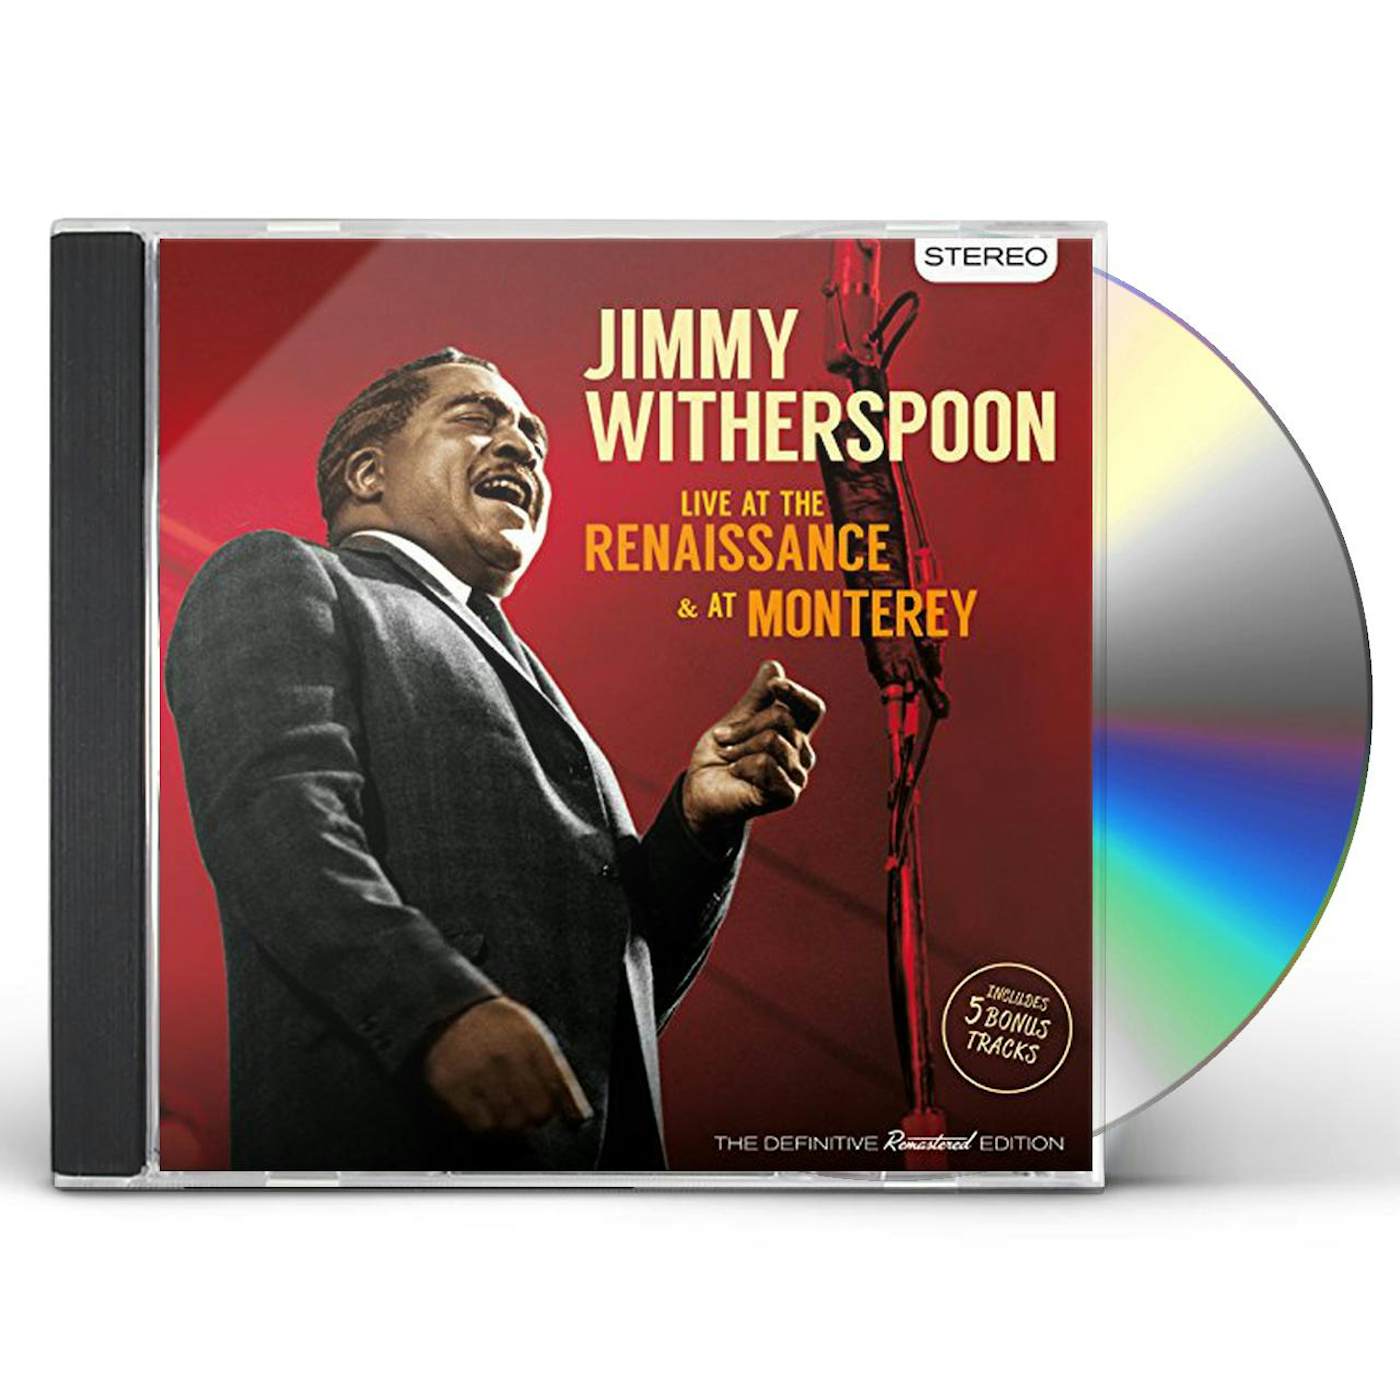 Jimmy Witherspoon LIVE AT THE RENAISSANCE & AT MONTE CD